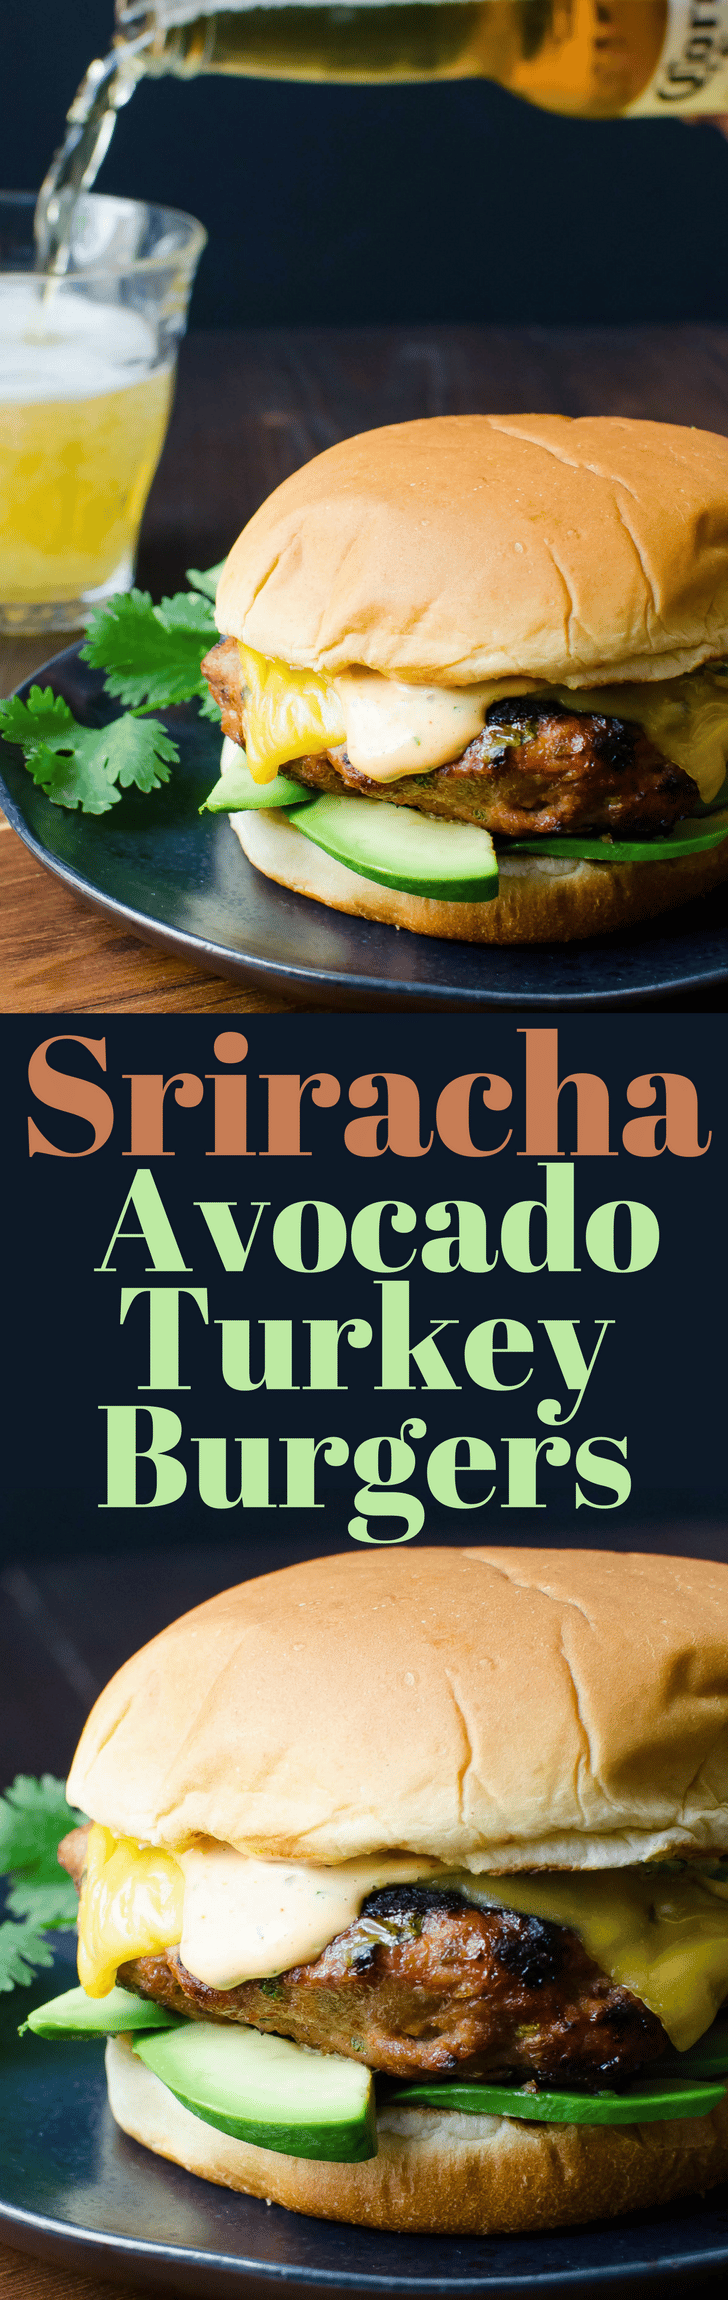 These easy, homemade ground turkey burgers are juicy, moist and spicy with a tangy, creamy sriracha sauce, melty cheese and fresh avocado and cilantro. The best grilled burgers for a cookout or picnic. #turkeyburgers #srirachasauce